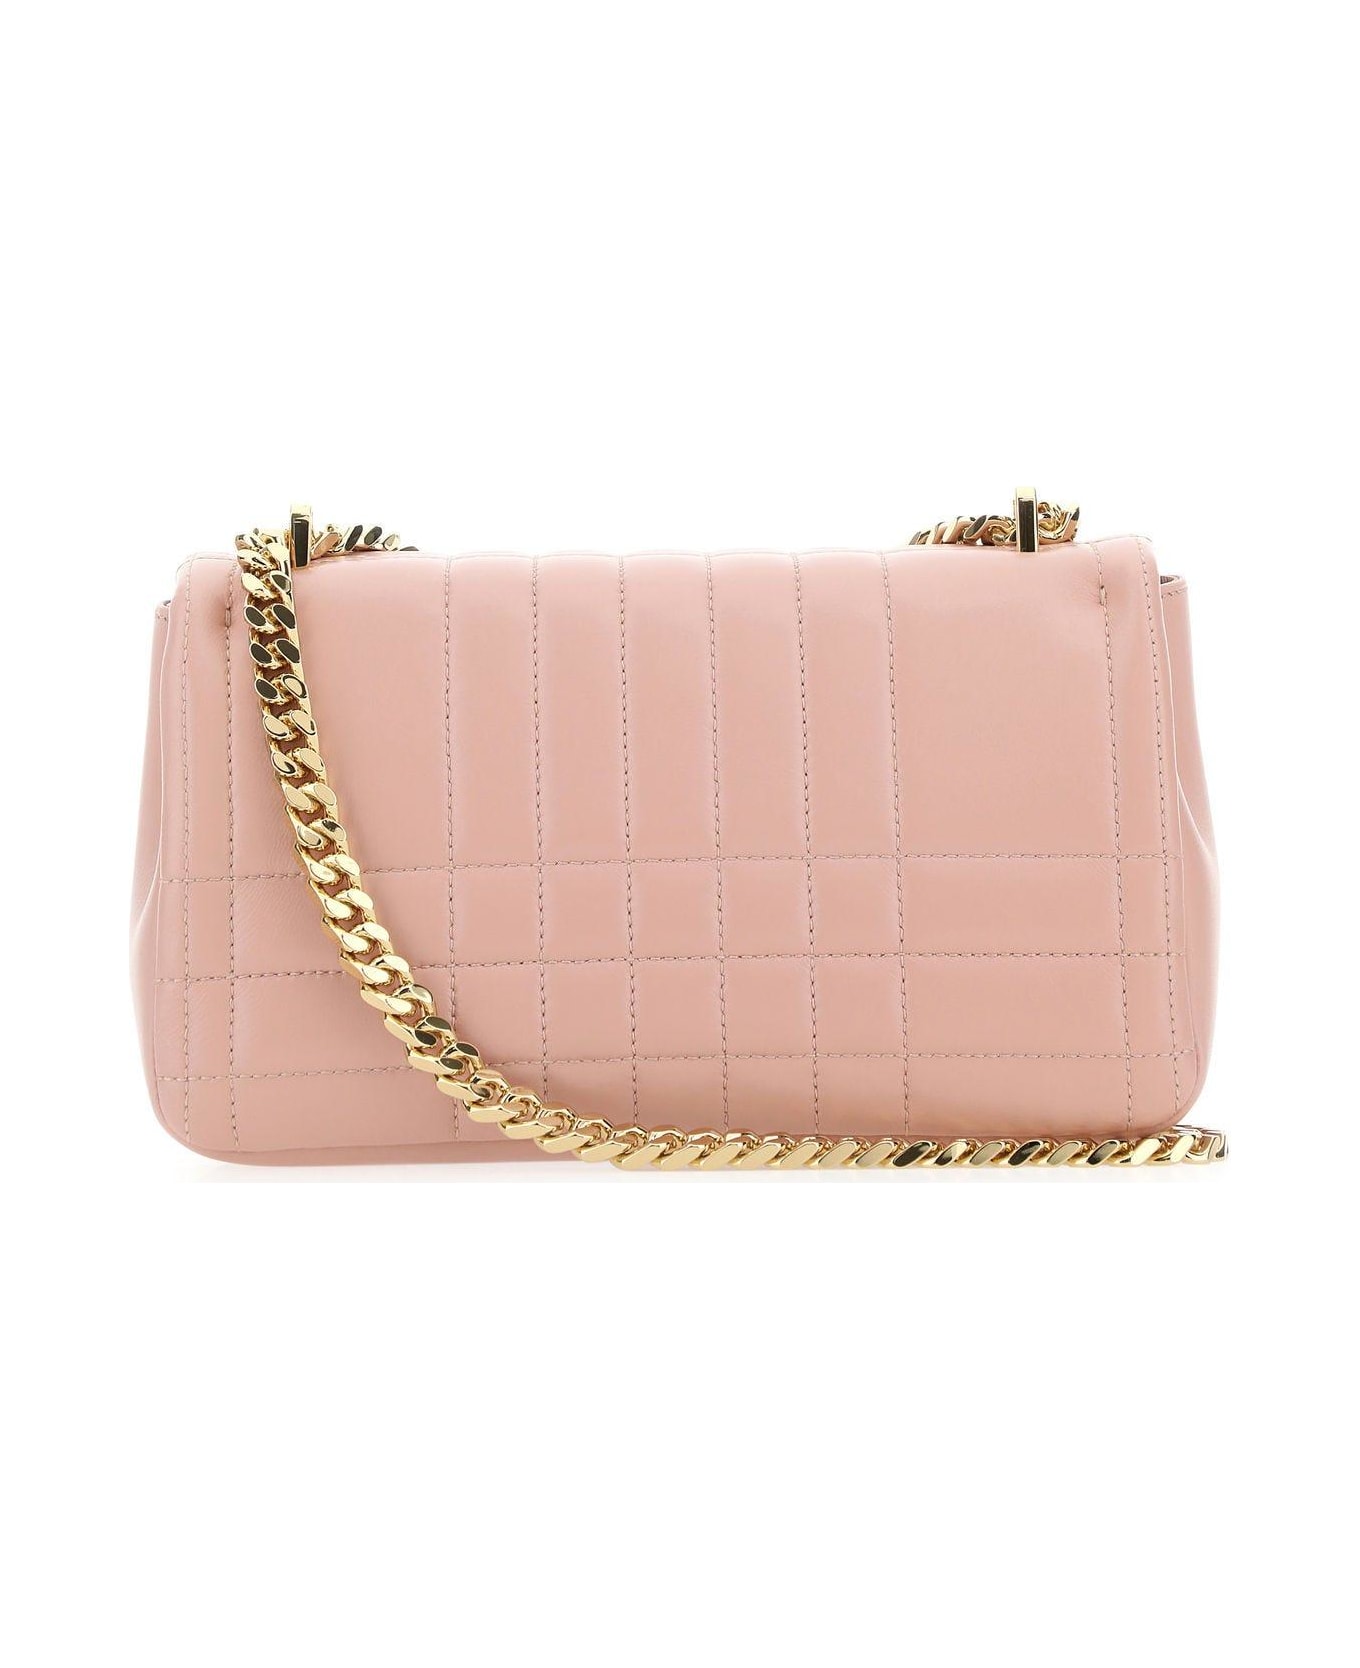 Burberry Pink Nappa Leather Small Lola Shoulder Bag - PINK ショルダーバッグ